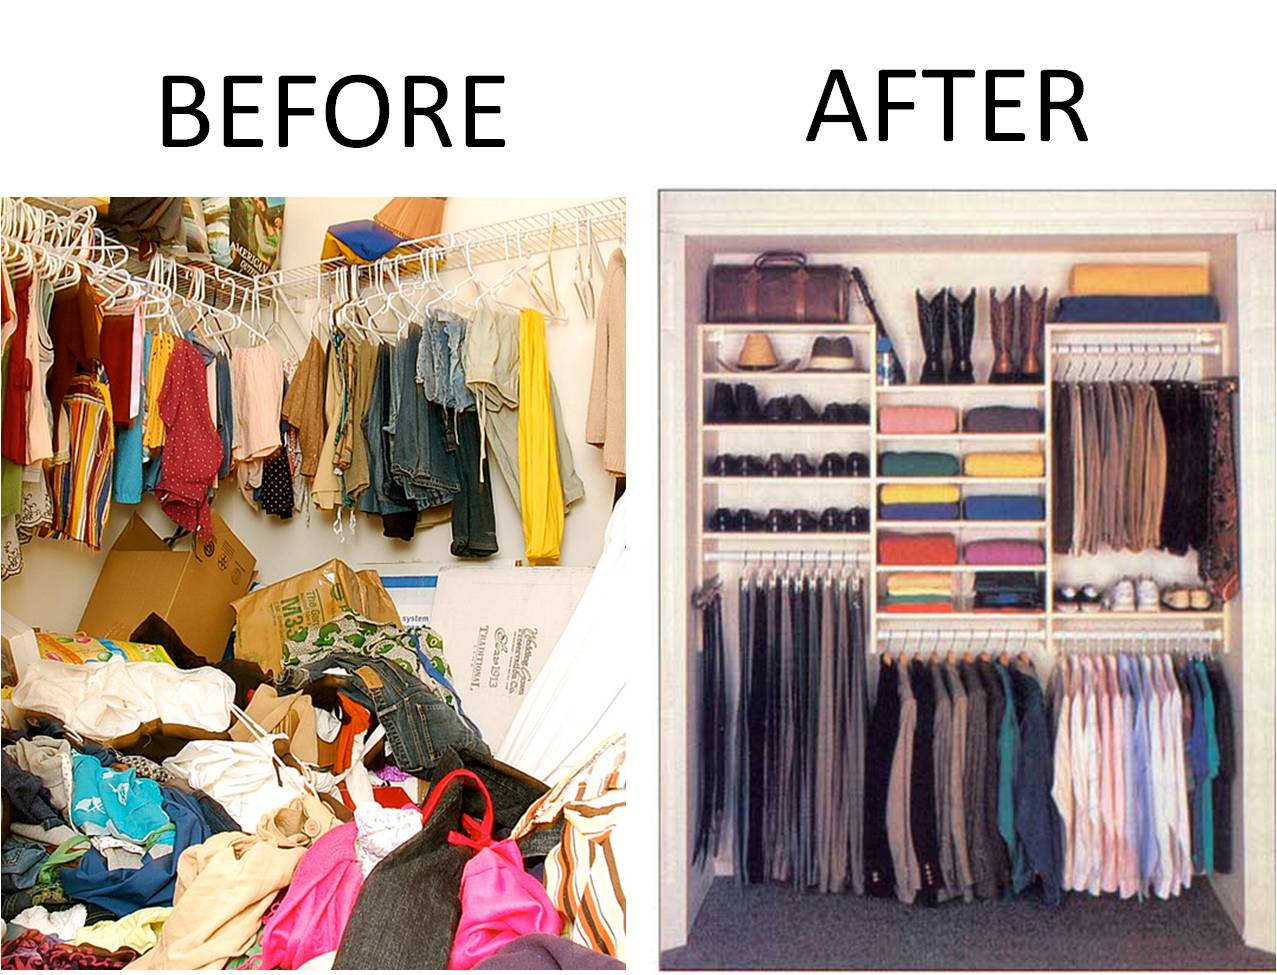 Closet-before-and-after.jpg